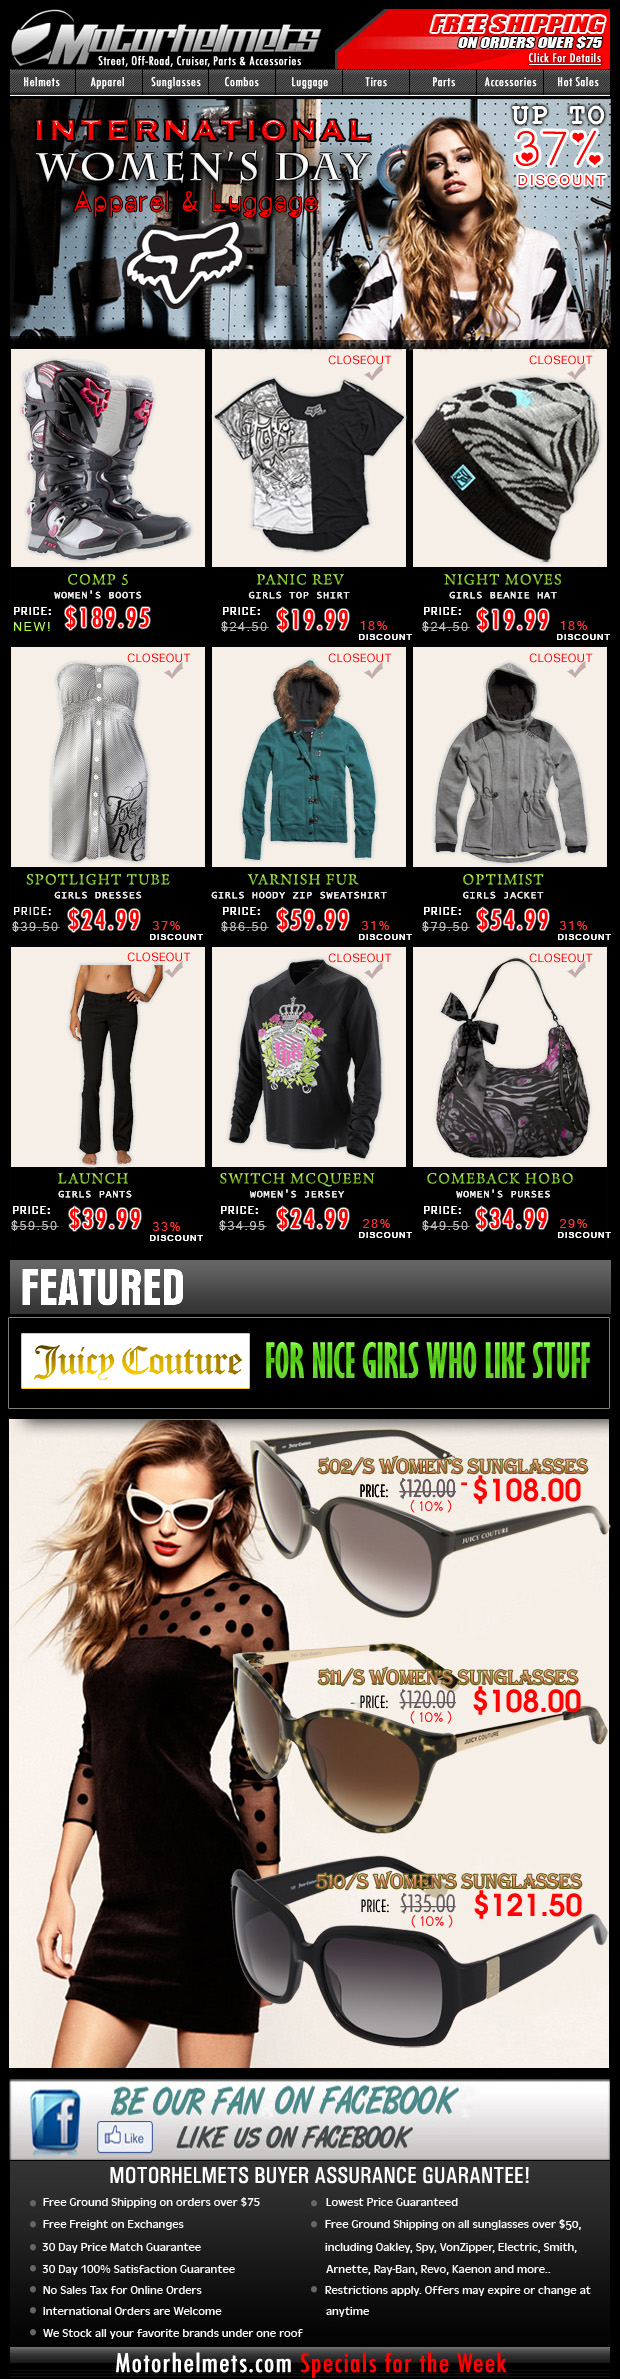 Special Tribute for the Ladies...New Arrivals and Closeouts from FOX!